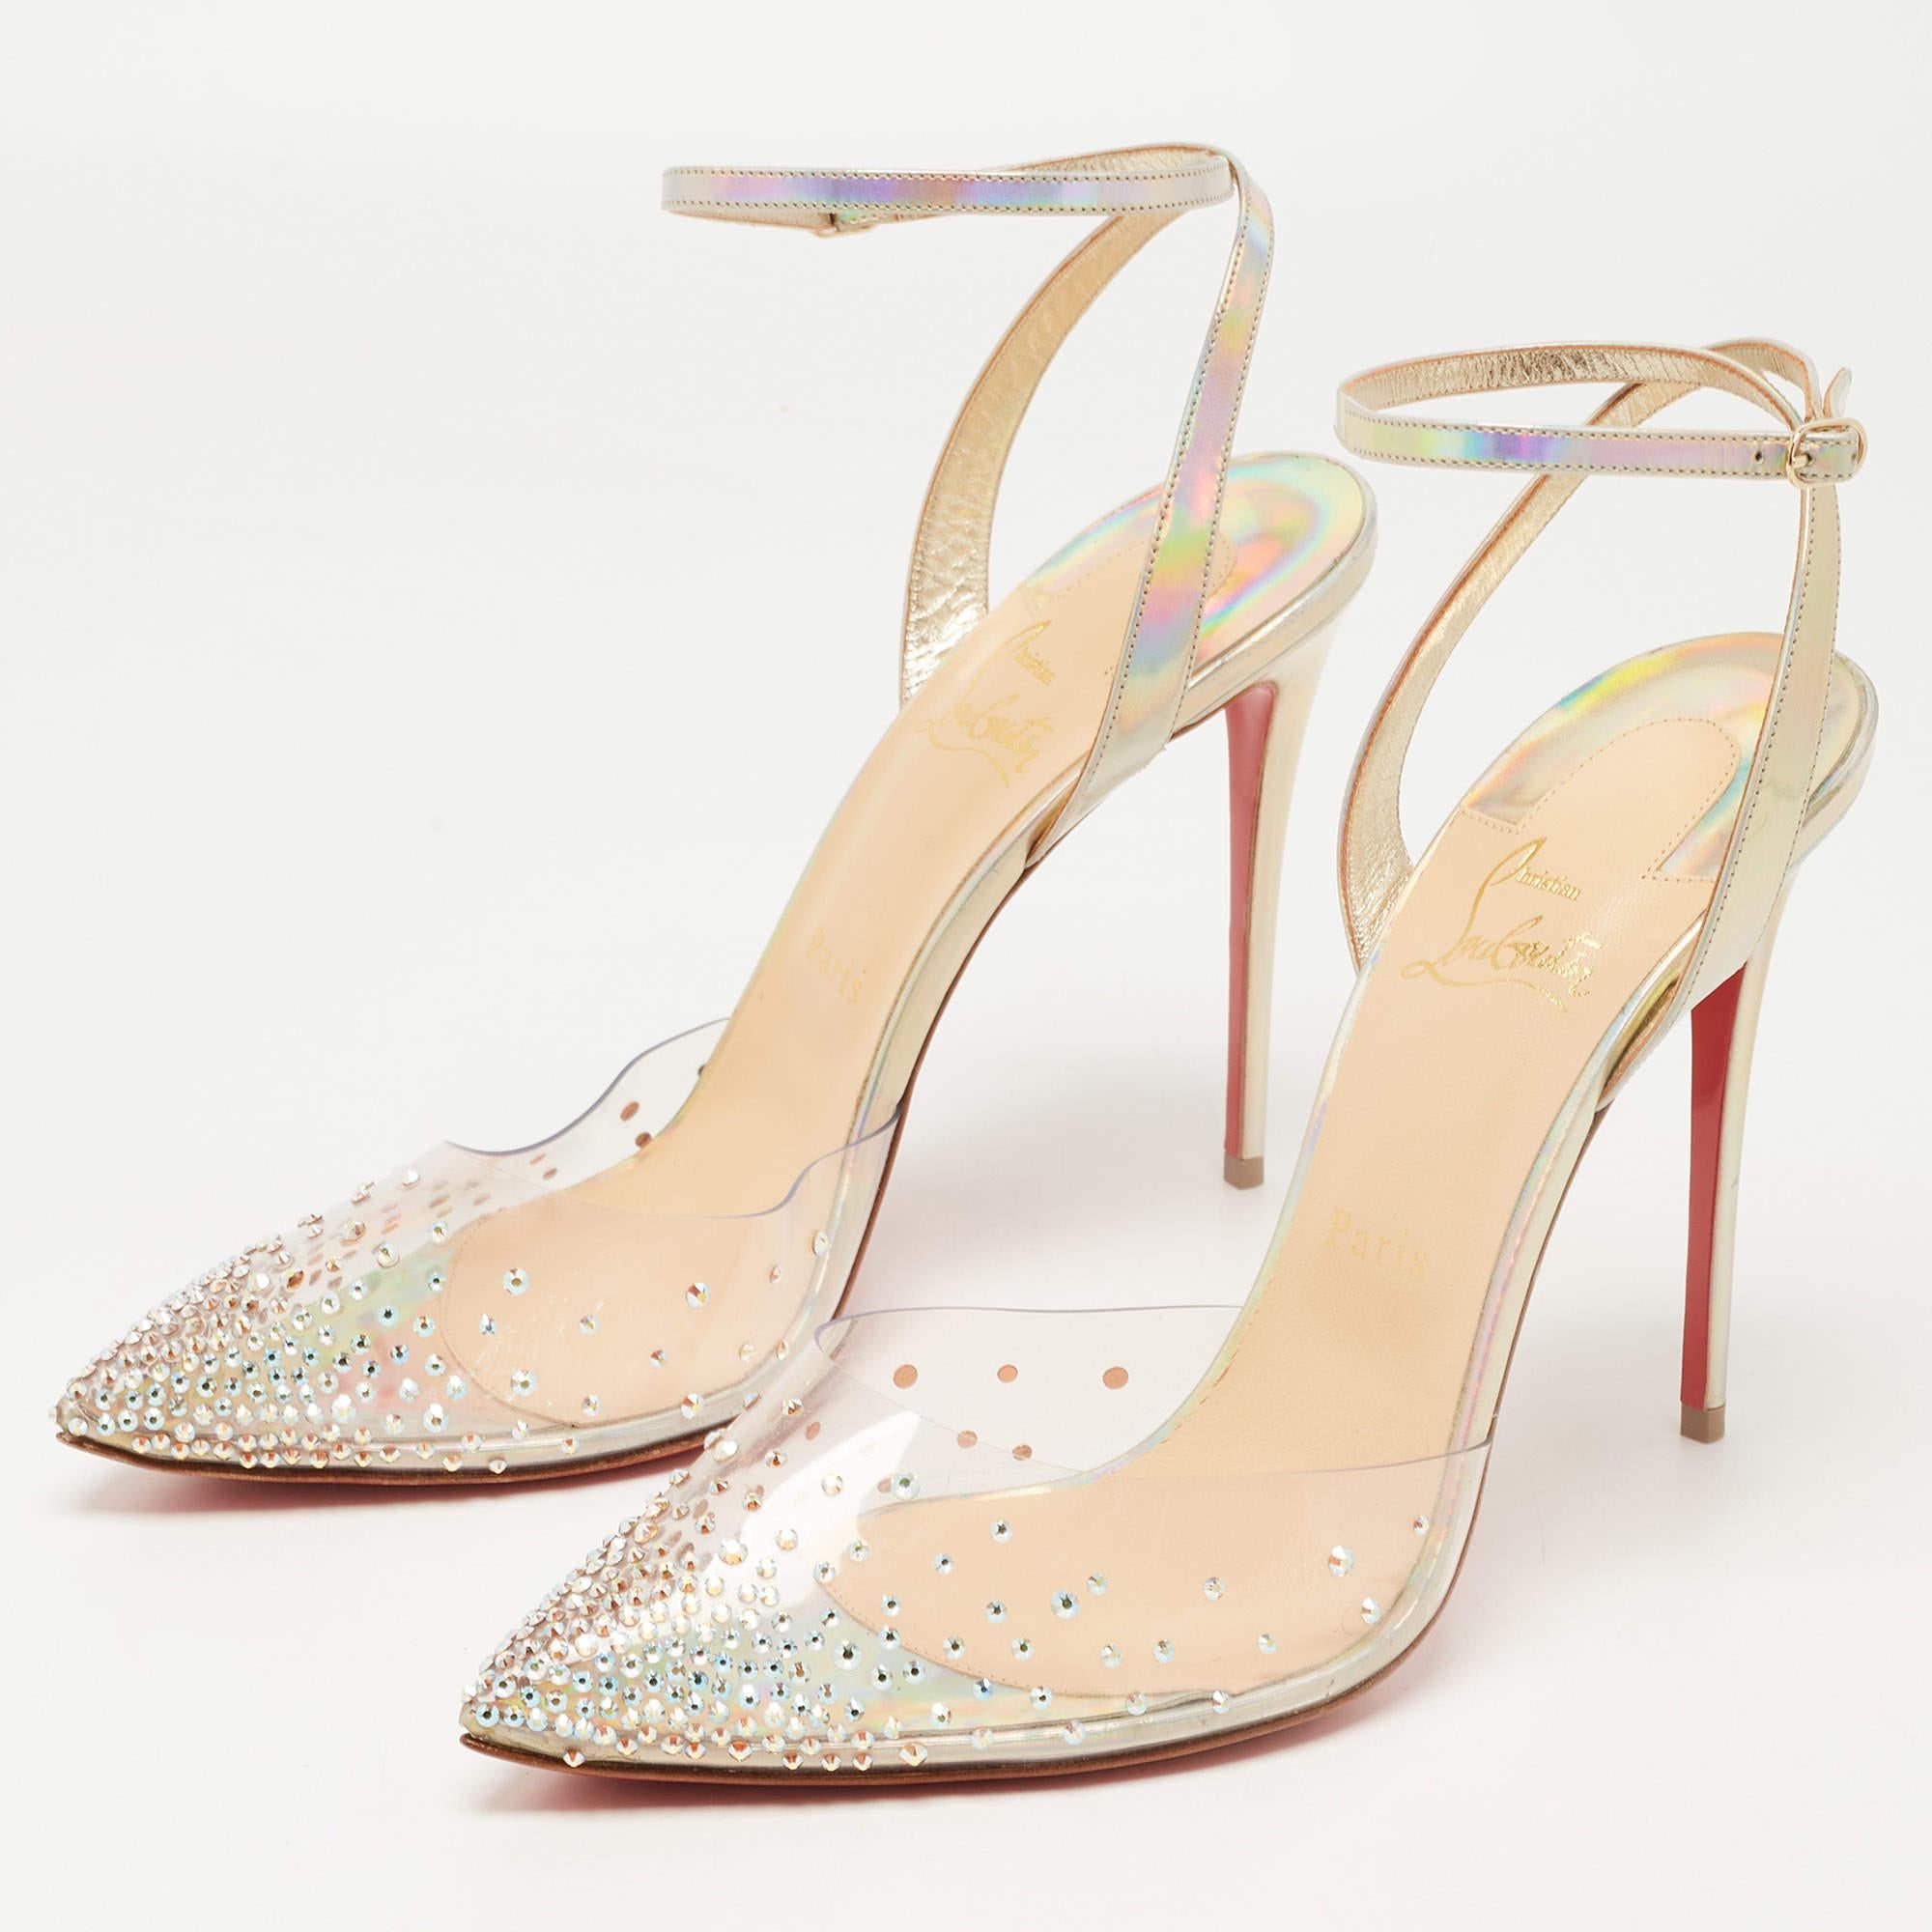 Women's Christian Louboutin Transparent Iridescent Patent Leather and PVC Spikaqueen 